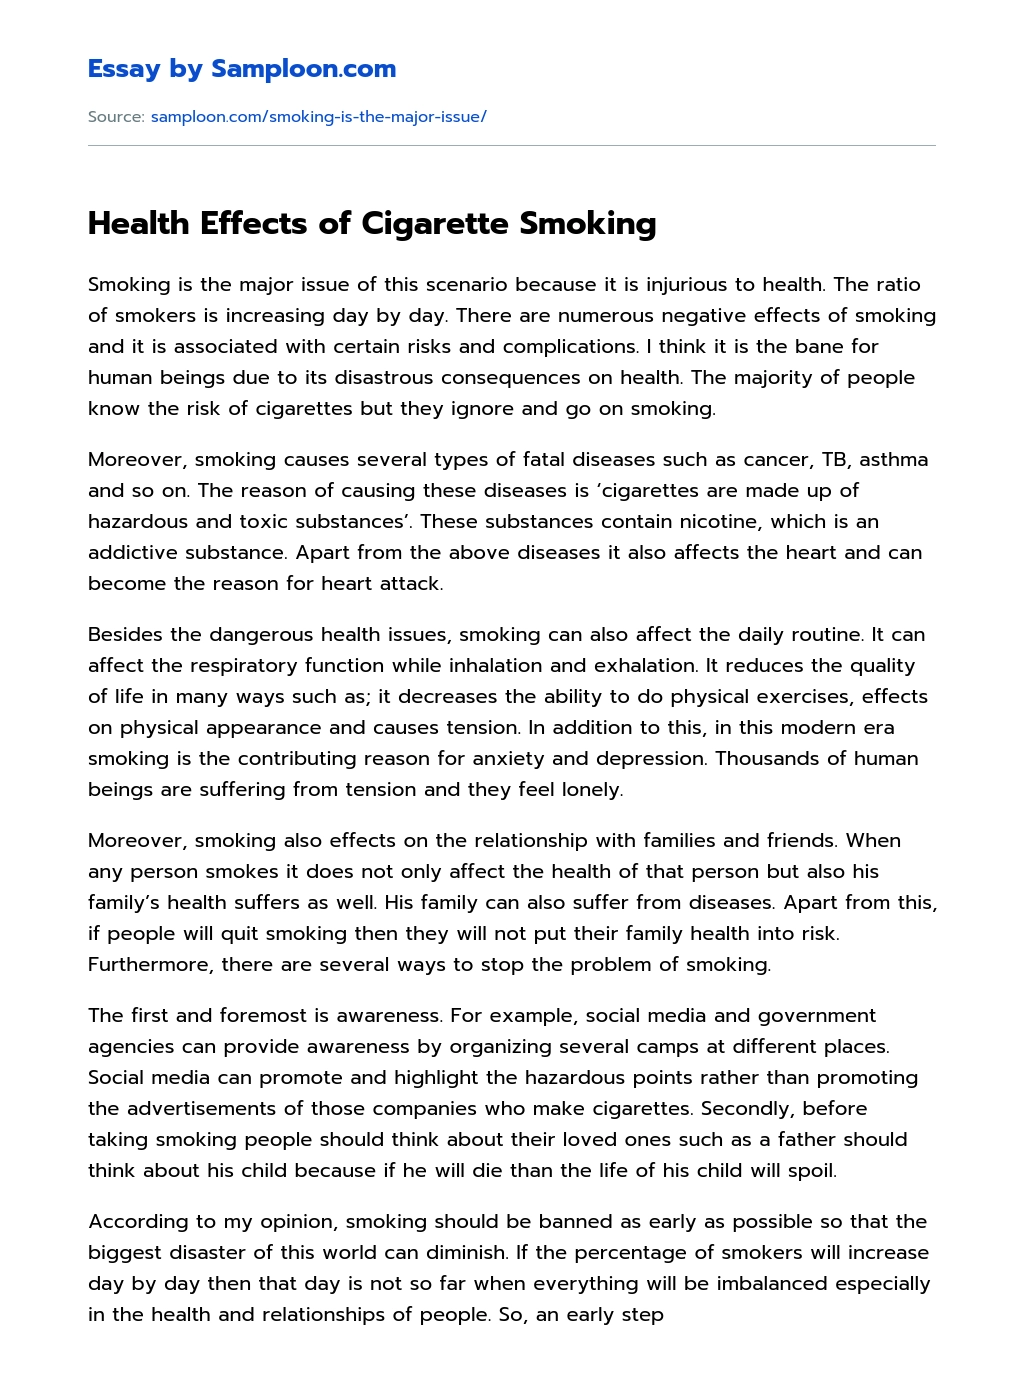 make an outline of an argumentative essay about cigarette smoking